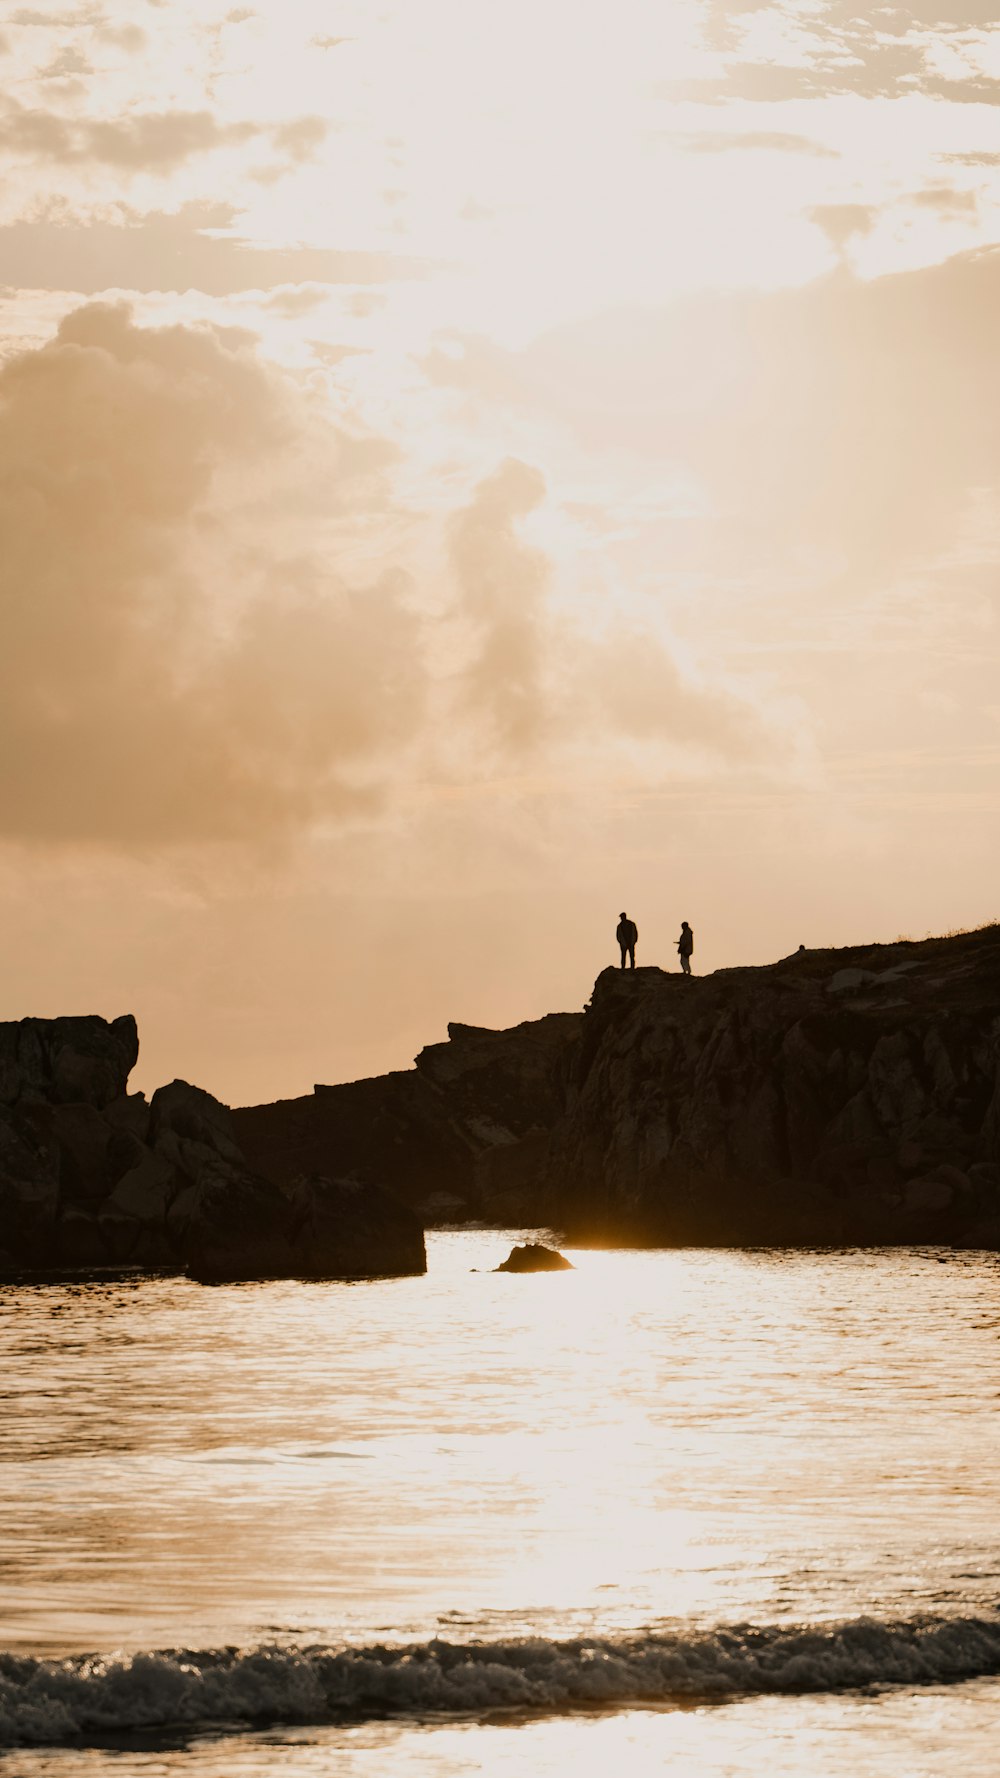 silhouette of 2 people standing on rock formation near sea during daytime